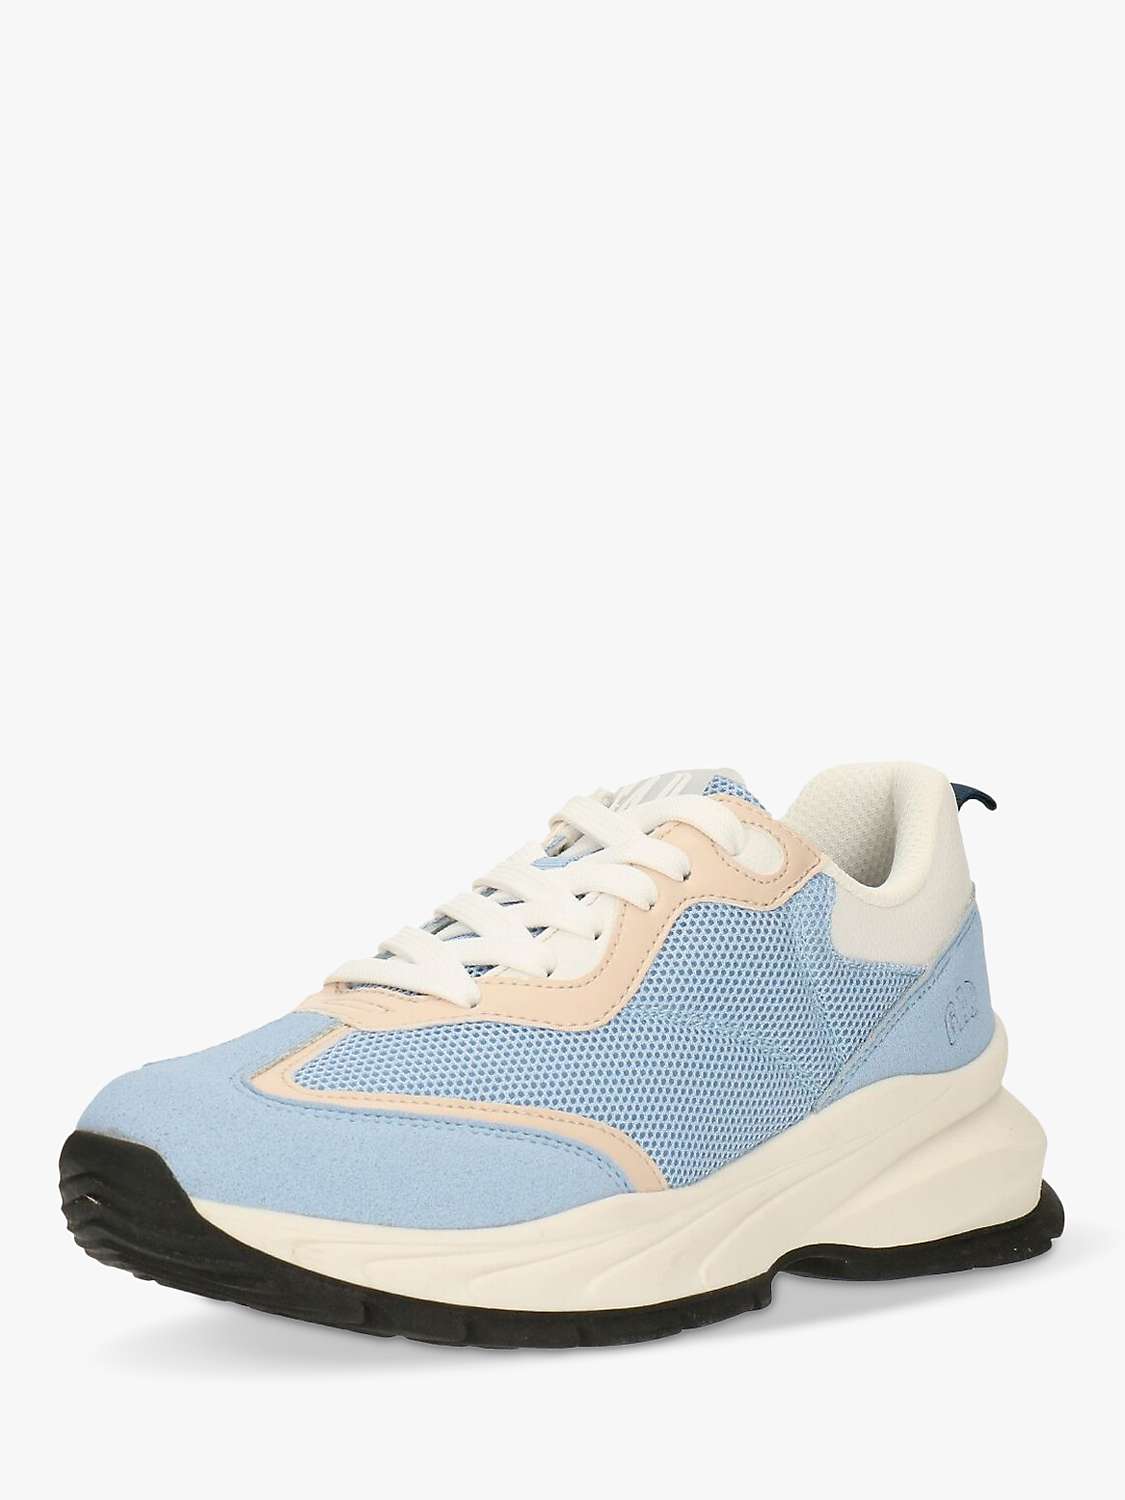 Buy Gap Kids' Aurora Lace Up Trainers Online at johnlewis.com